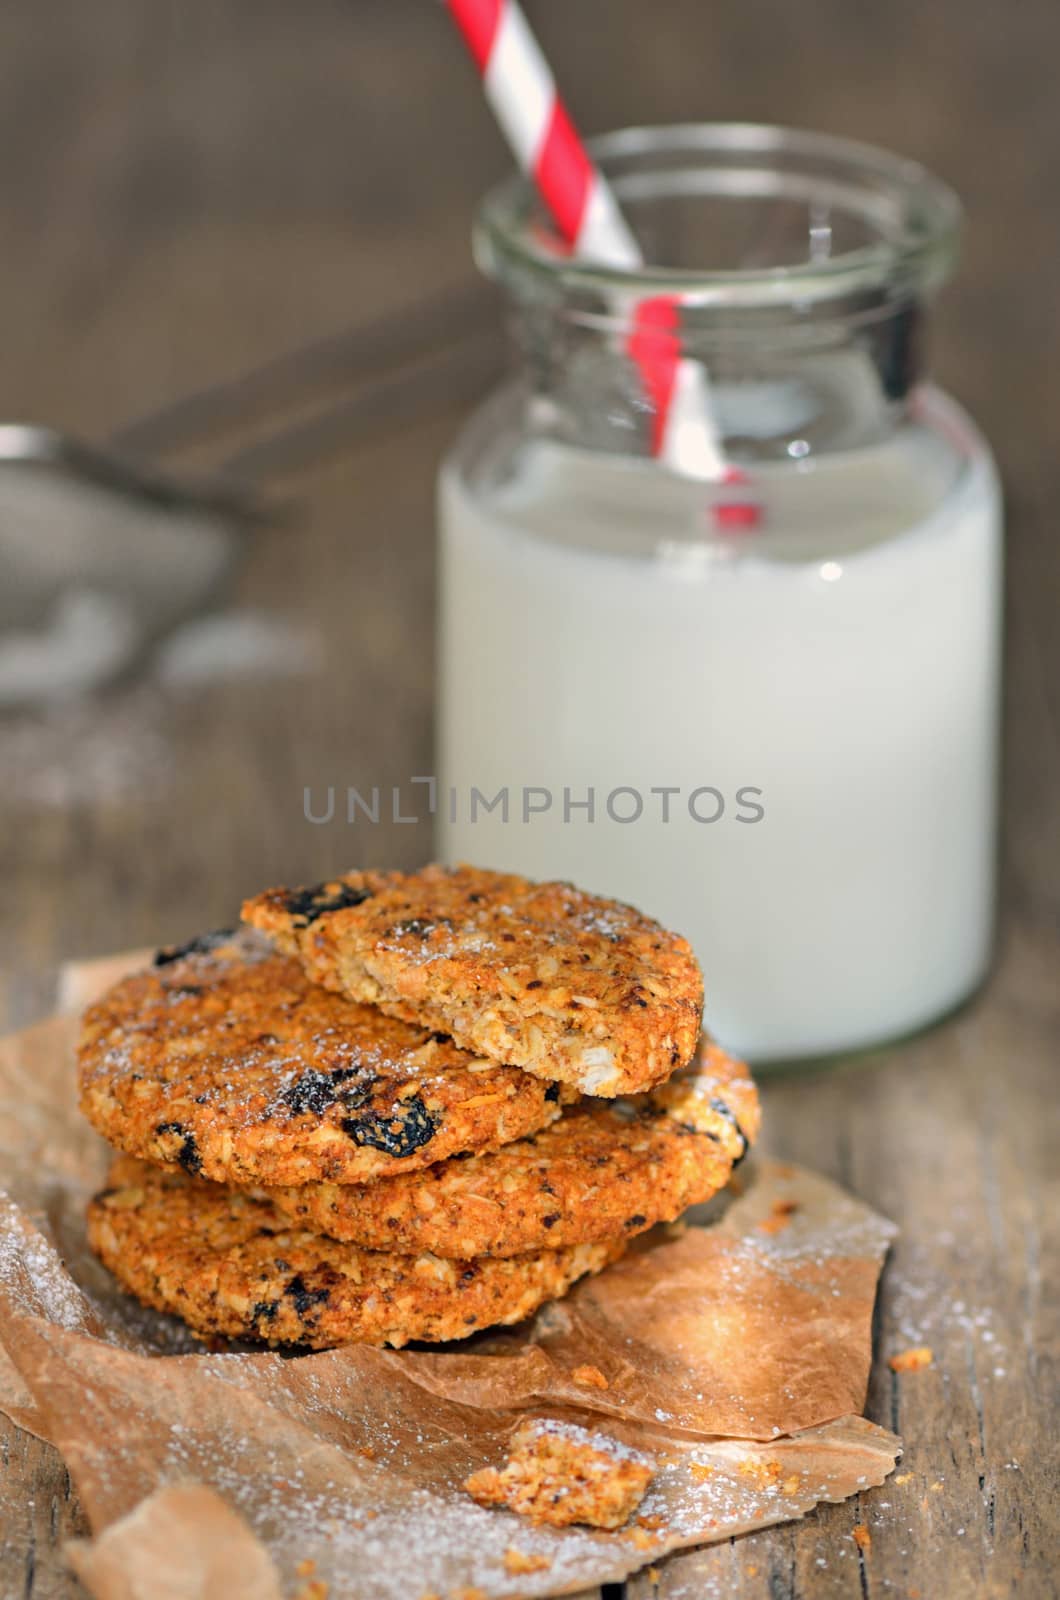 dietetic biscuits and milk on a wood bakground